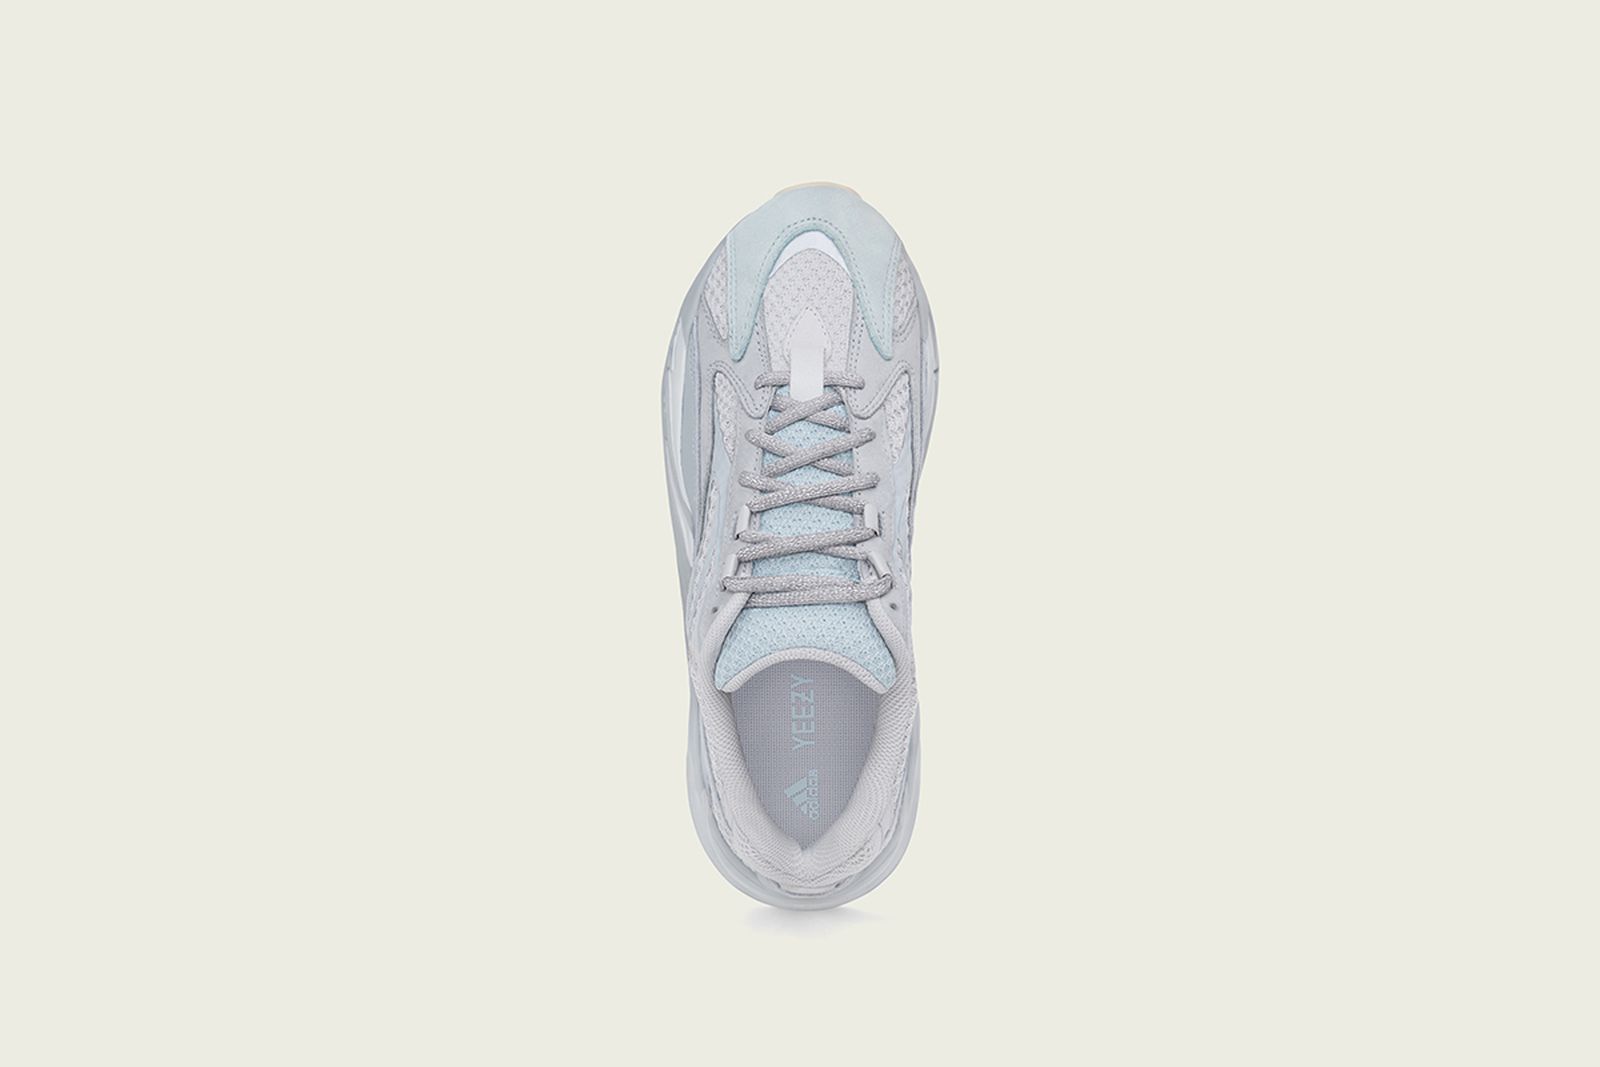 adidas yeezy boost 700 v2 inertia release date price kanye west